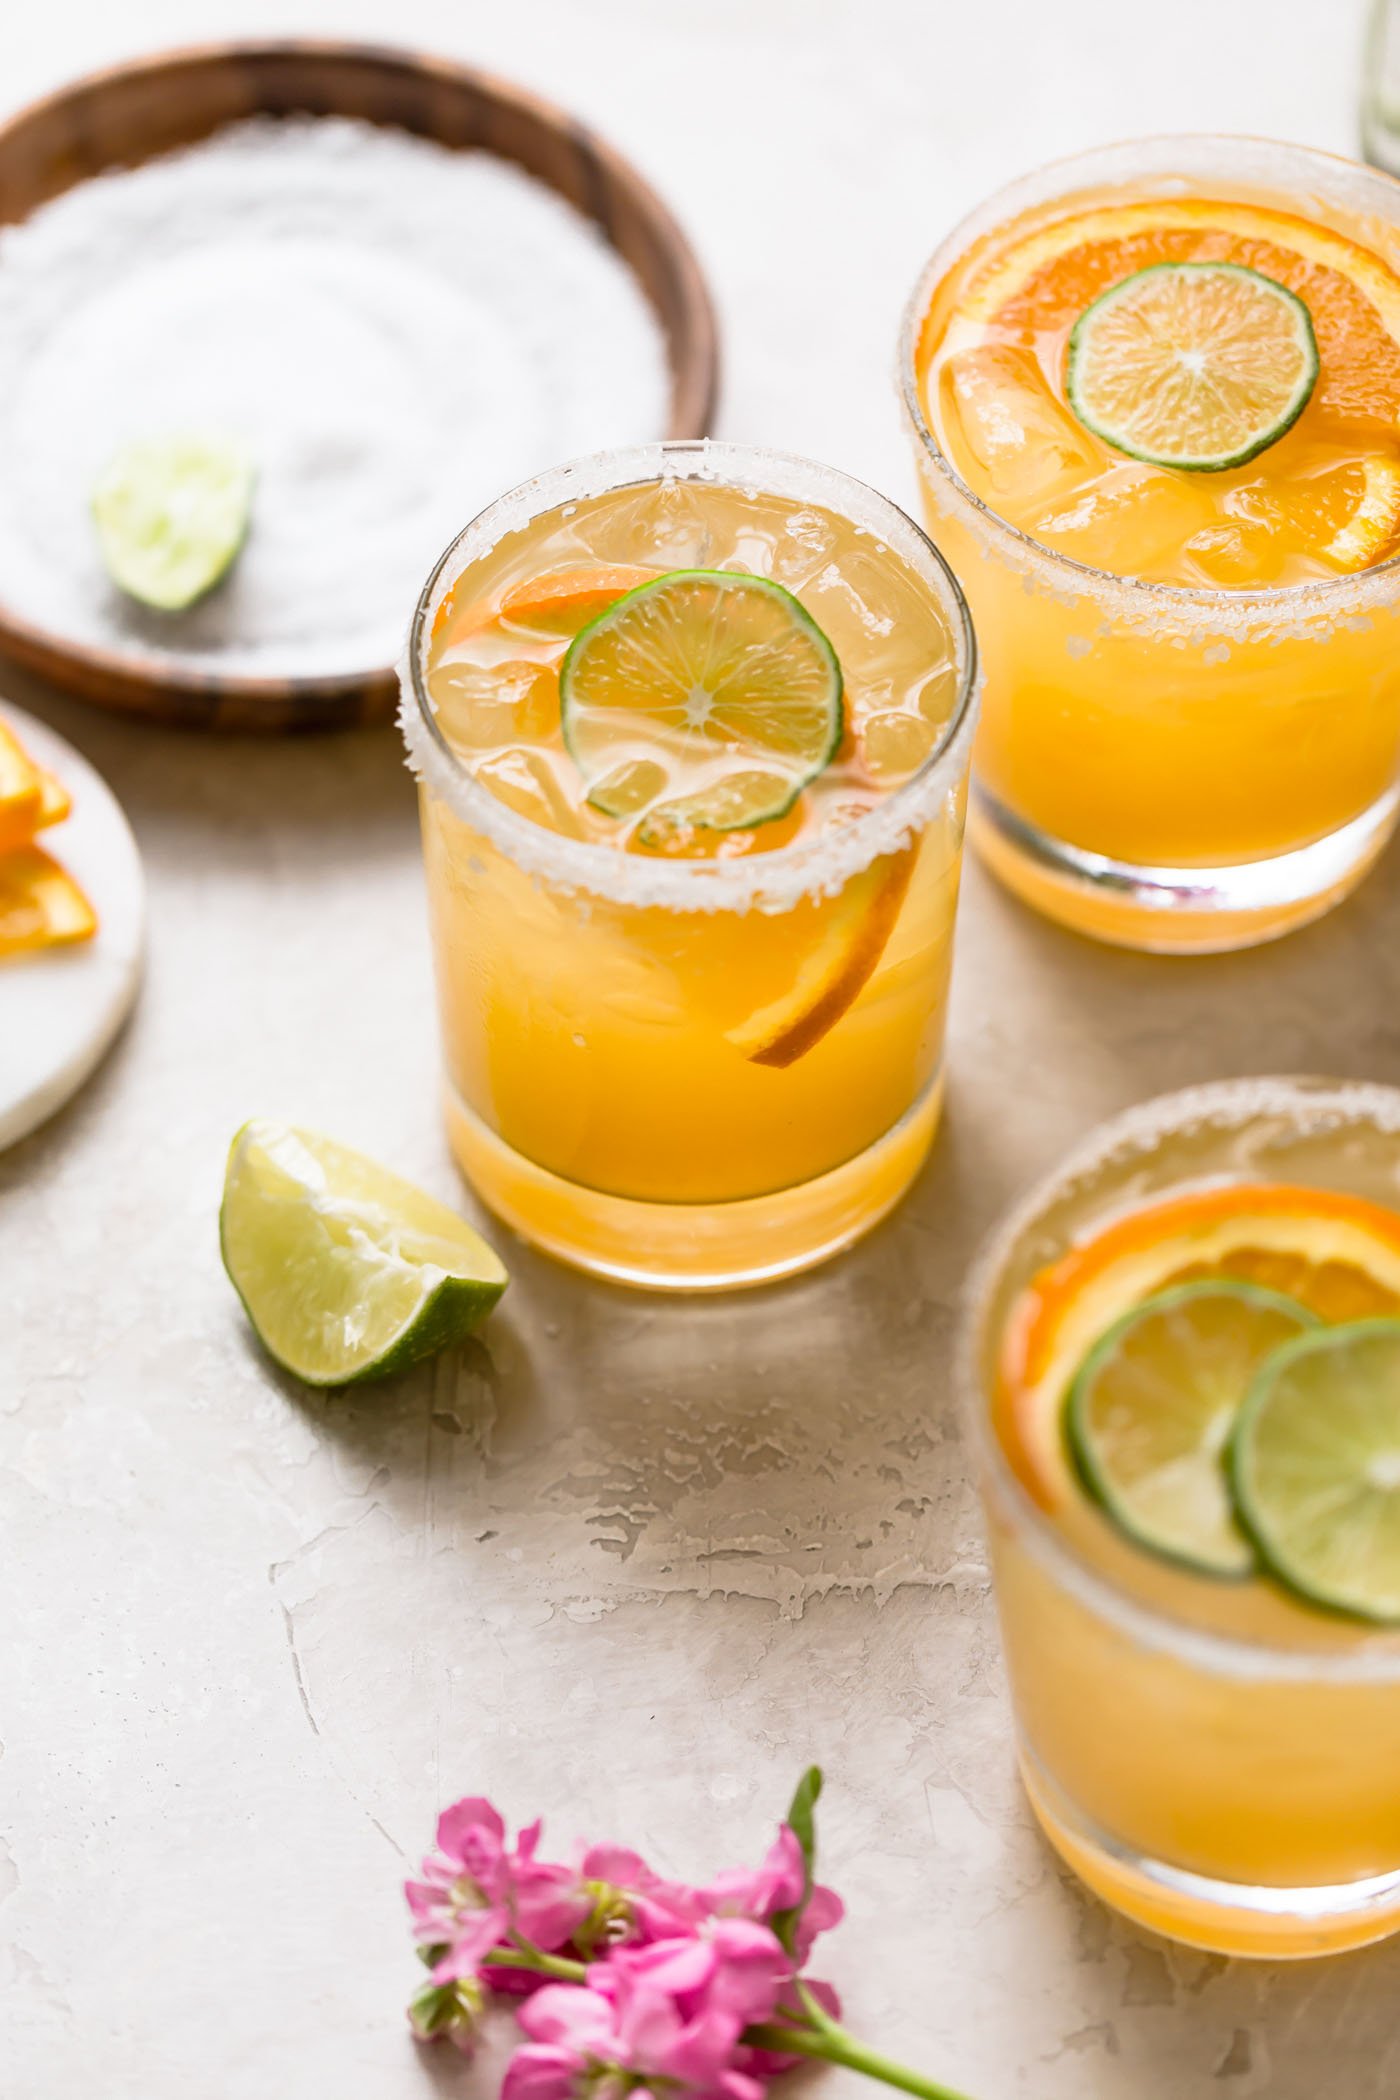 refined sugar-free margaritas are the perfect light & refreshing cocktail! this simple margarita recipe is made without triple sec, using the freshest ingredients instead: fresh lime juice & fresh orange juice, with a little maple syrup to sweeten things up slightly. a modern take on the skinny margarita and a classic margarita on the rocks, say hello to the best margarita recipe & get those chips & guac ready!!! #playswellwithbutter #classicmargaritarecipe #skinnymargaritarecipe #refinedsugarfreerecipes #margaritaontherocks #tequila #maplesyrup #summercocktail #easycocktail